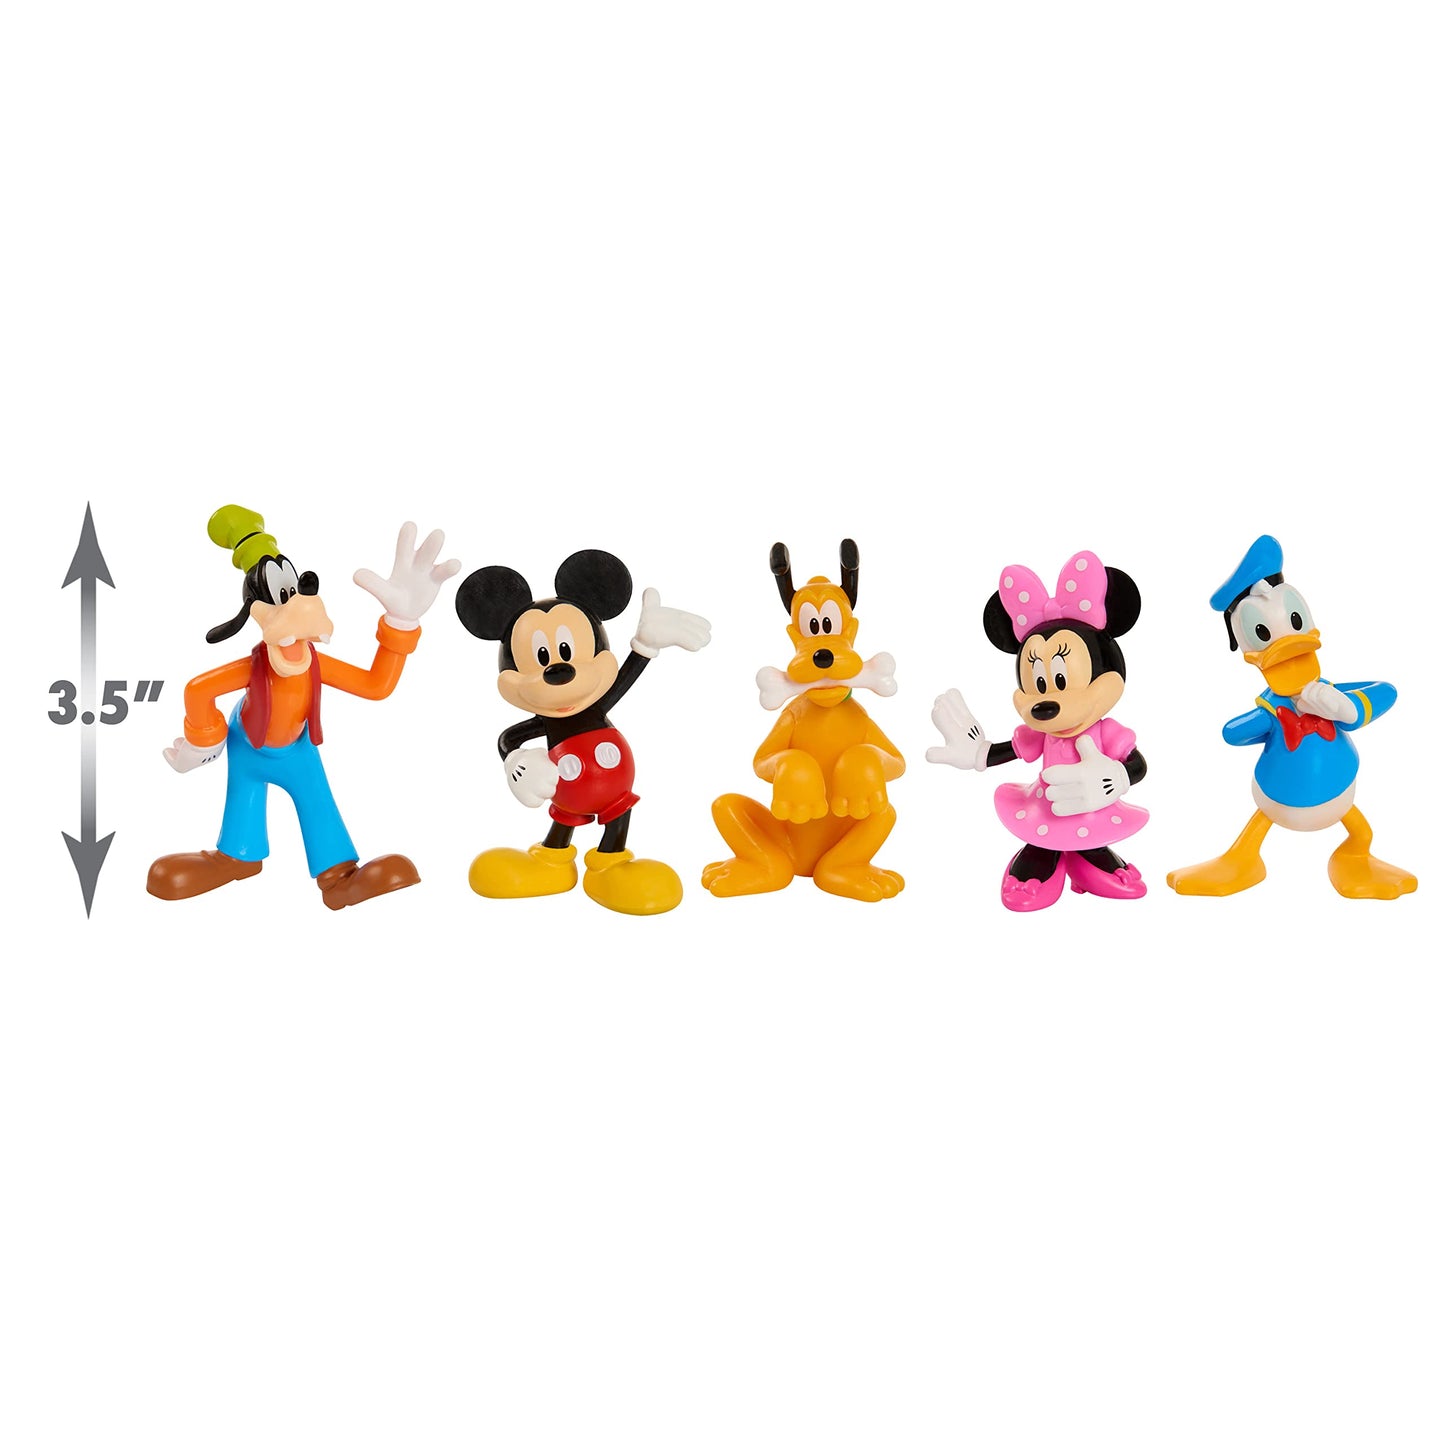 Disney Junior Mickey Mouse Collectible Figure Set, 5 Pack, 3-inch Collectible Figures, Kids Toys for Ages 3 Up by Just Play